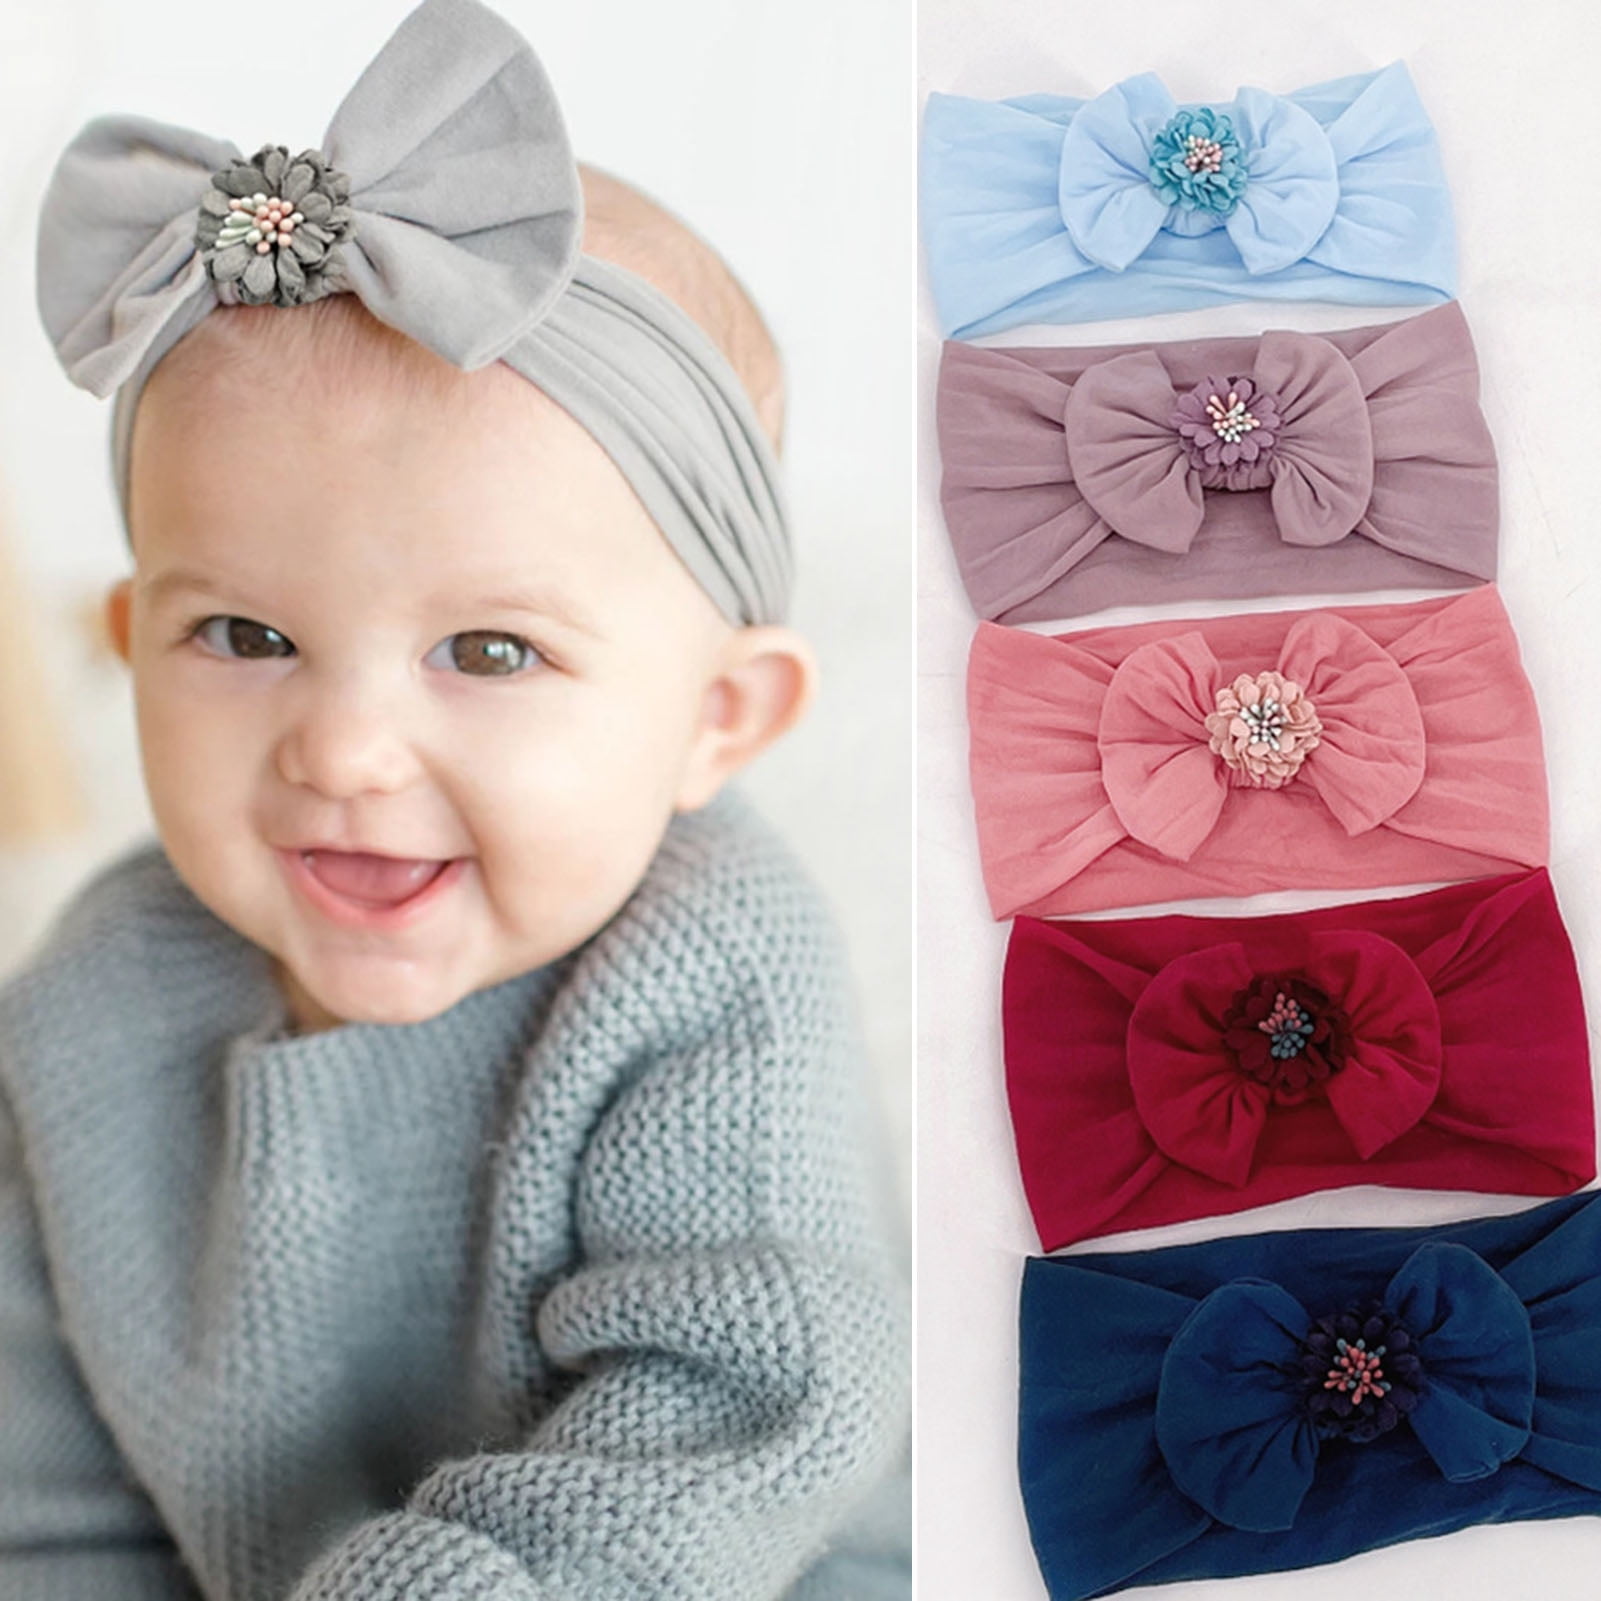 JLIKA Baby Girl Headbands Cotton Knotted Headband Headwrap Modern Turban  Fashion Head Band Wrap Rabbit Ear Bows for newborns infants toddlers - 10  Pack (Modern Designs Collection) 